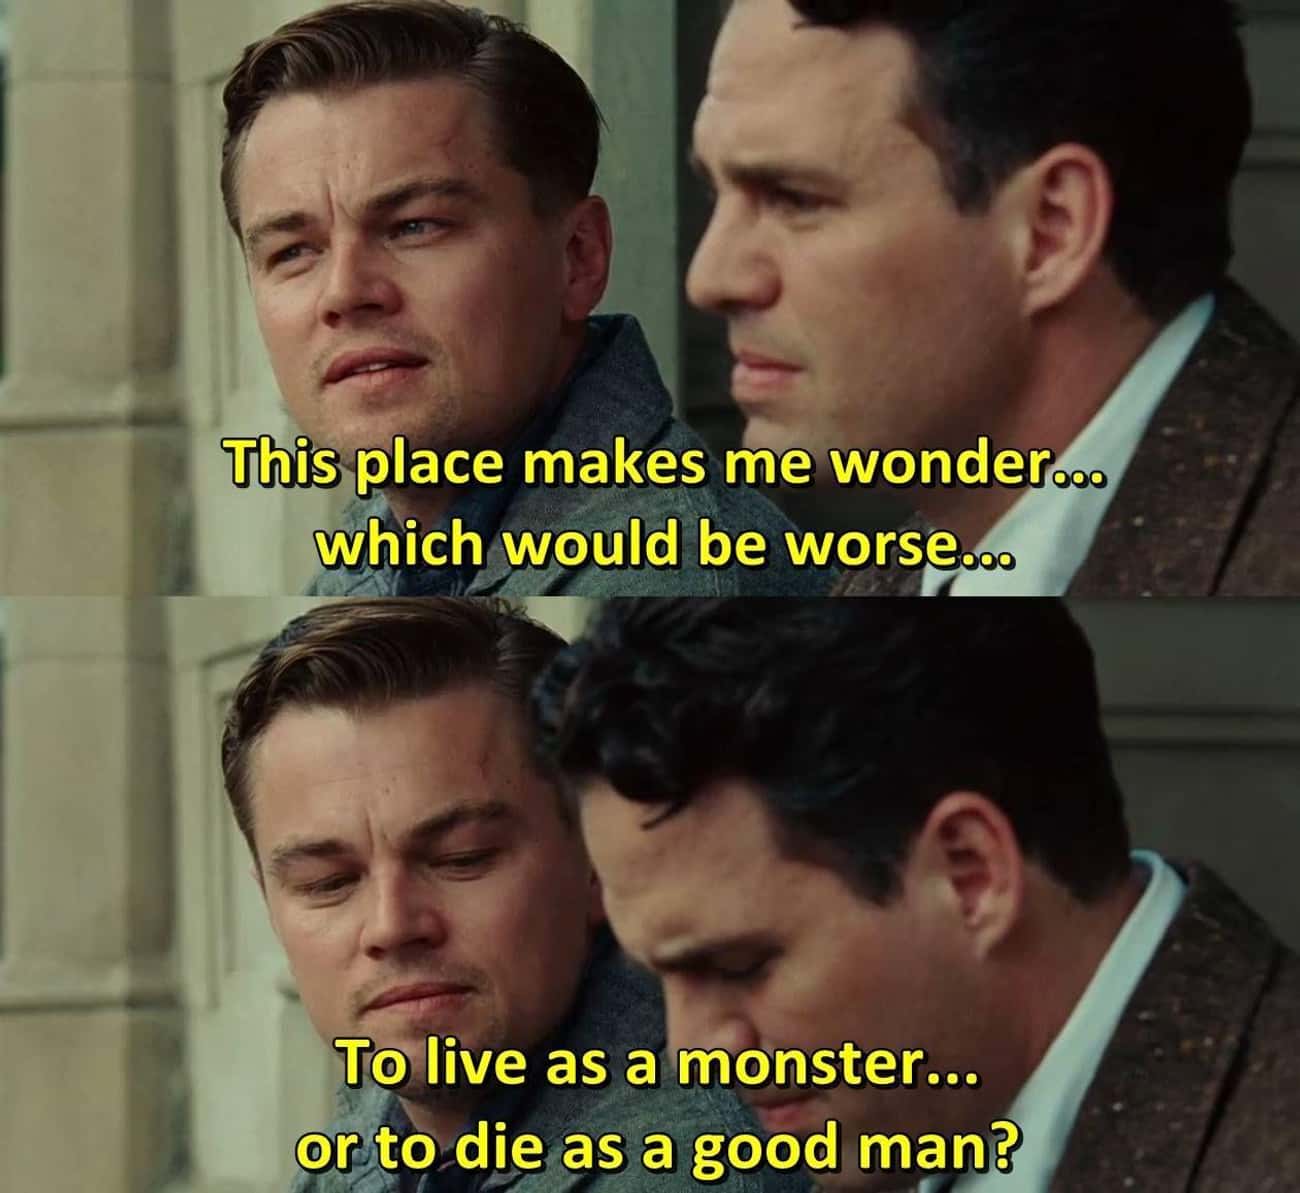 Teddy Comes To A Decision About His Reality In 'Shutter Island'